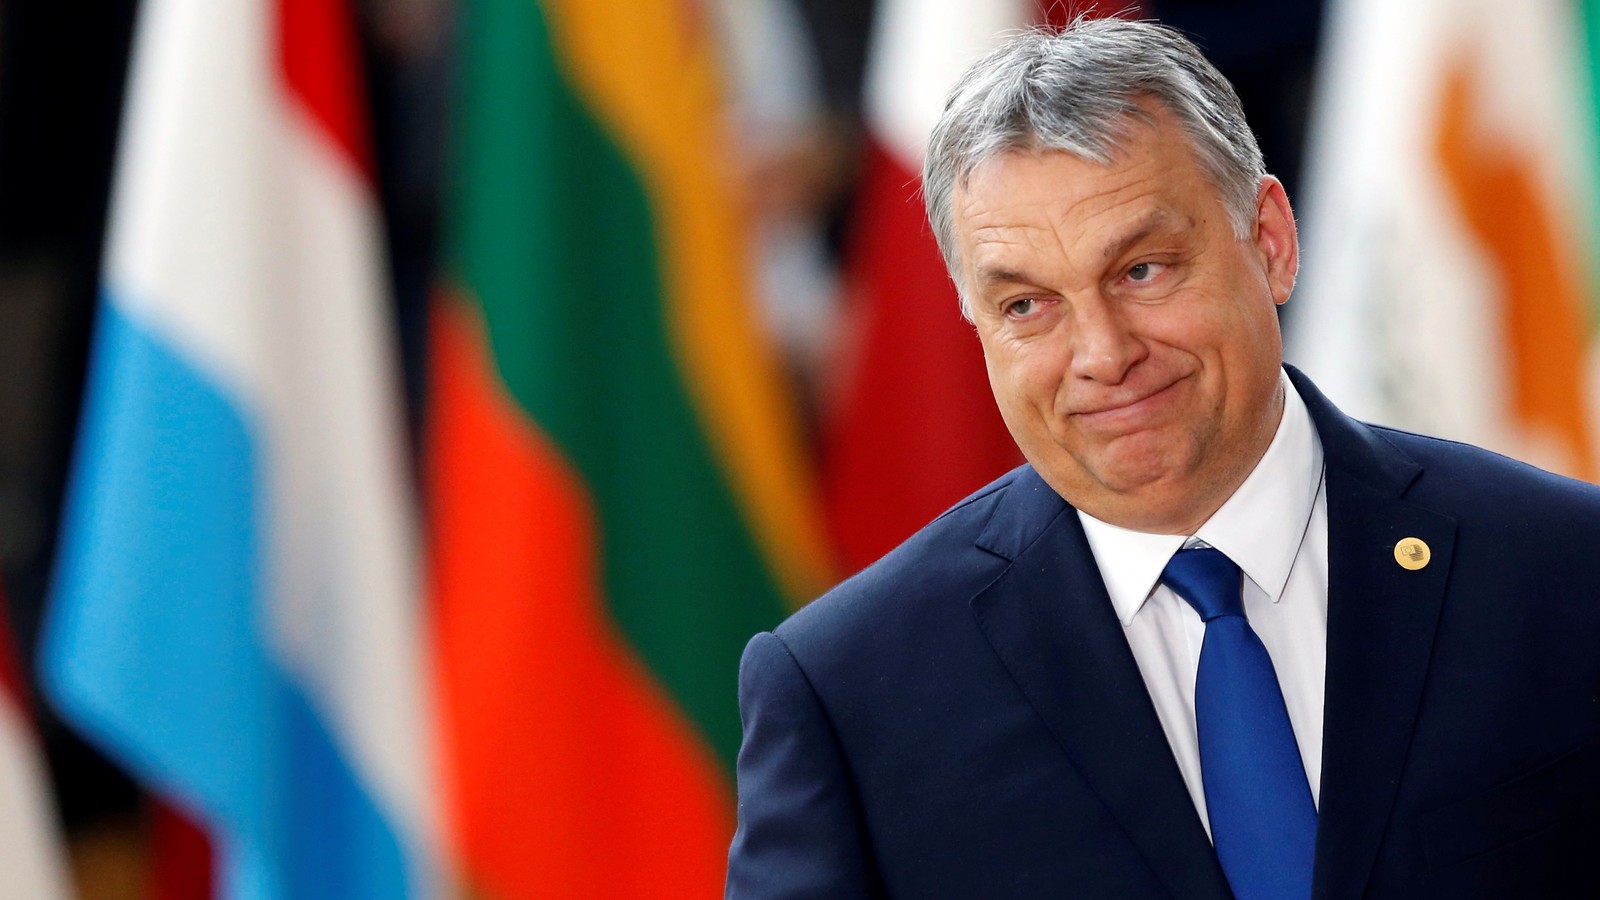 Hungary to cap prices of six basic foodstuffs: Orban